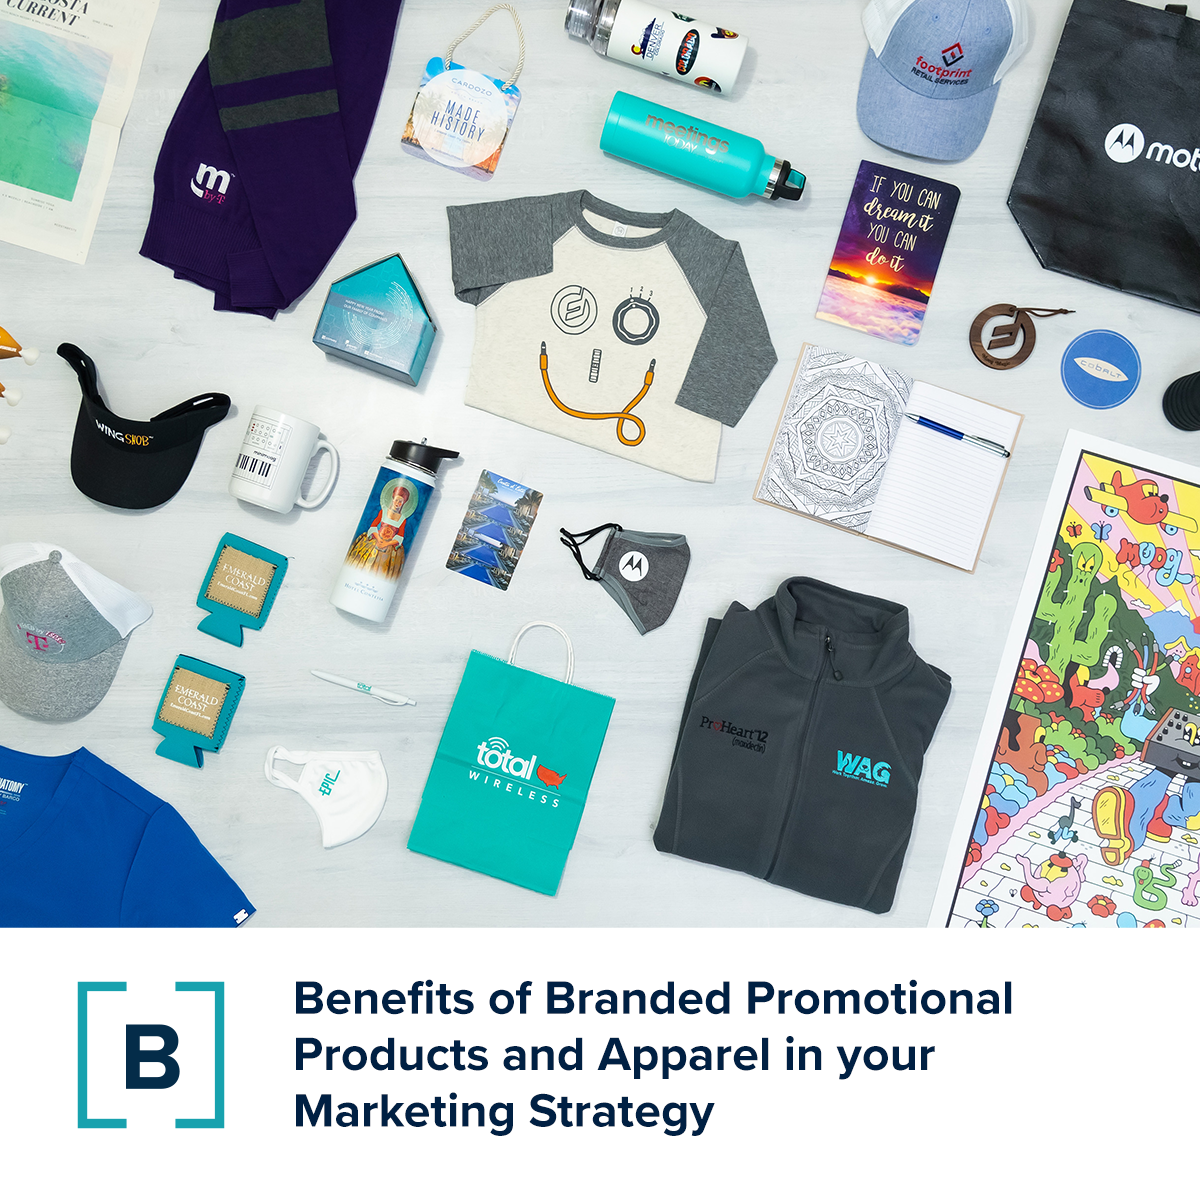 Benefits of branded products and apparel in your marketing strategy